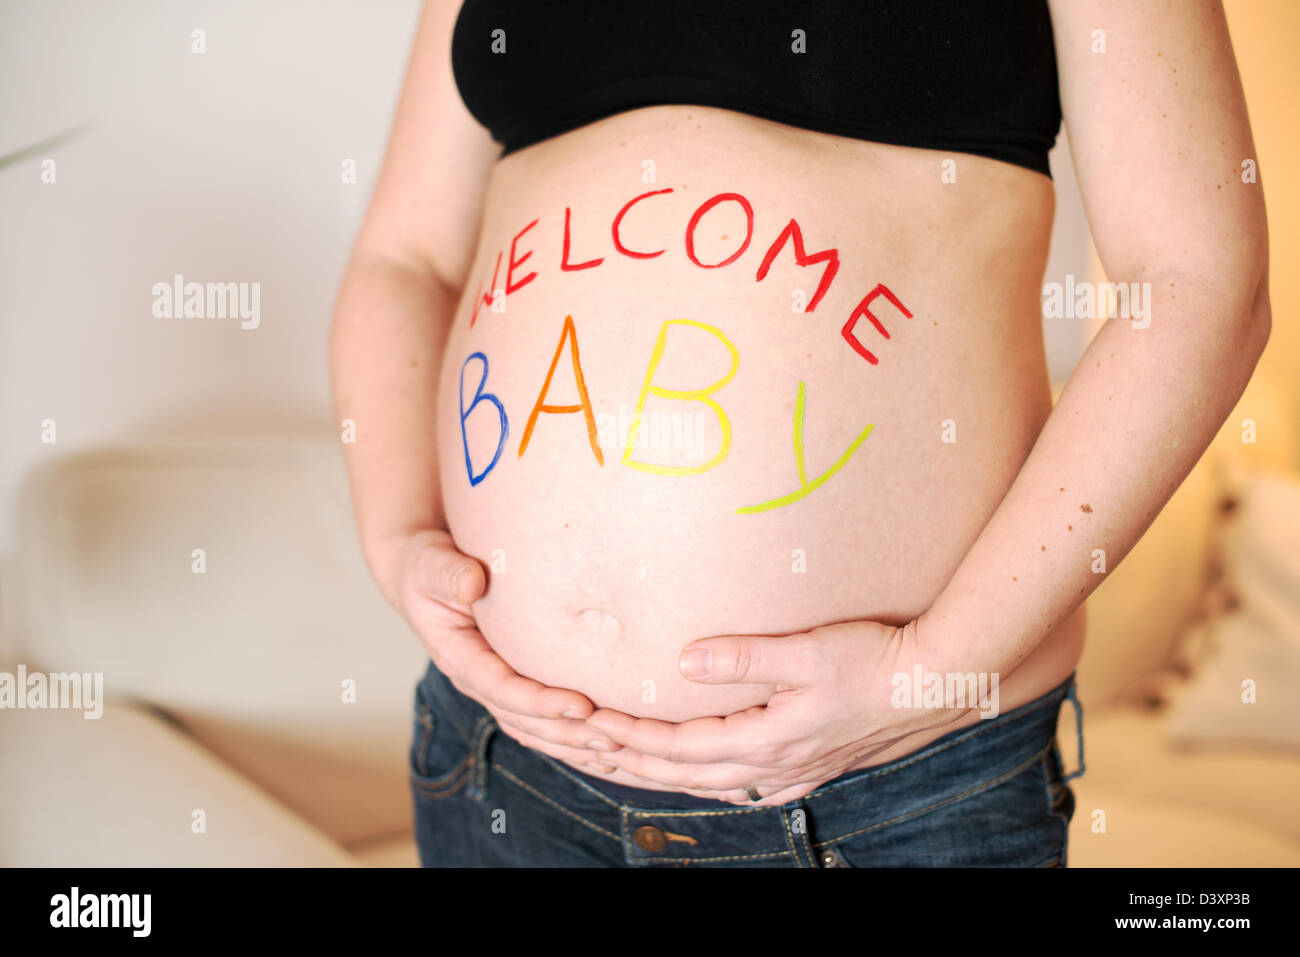 'Welcome Baby' is painted in colorful letters on the baby belly of a pregnant woman. Stock Photo